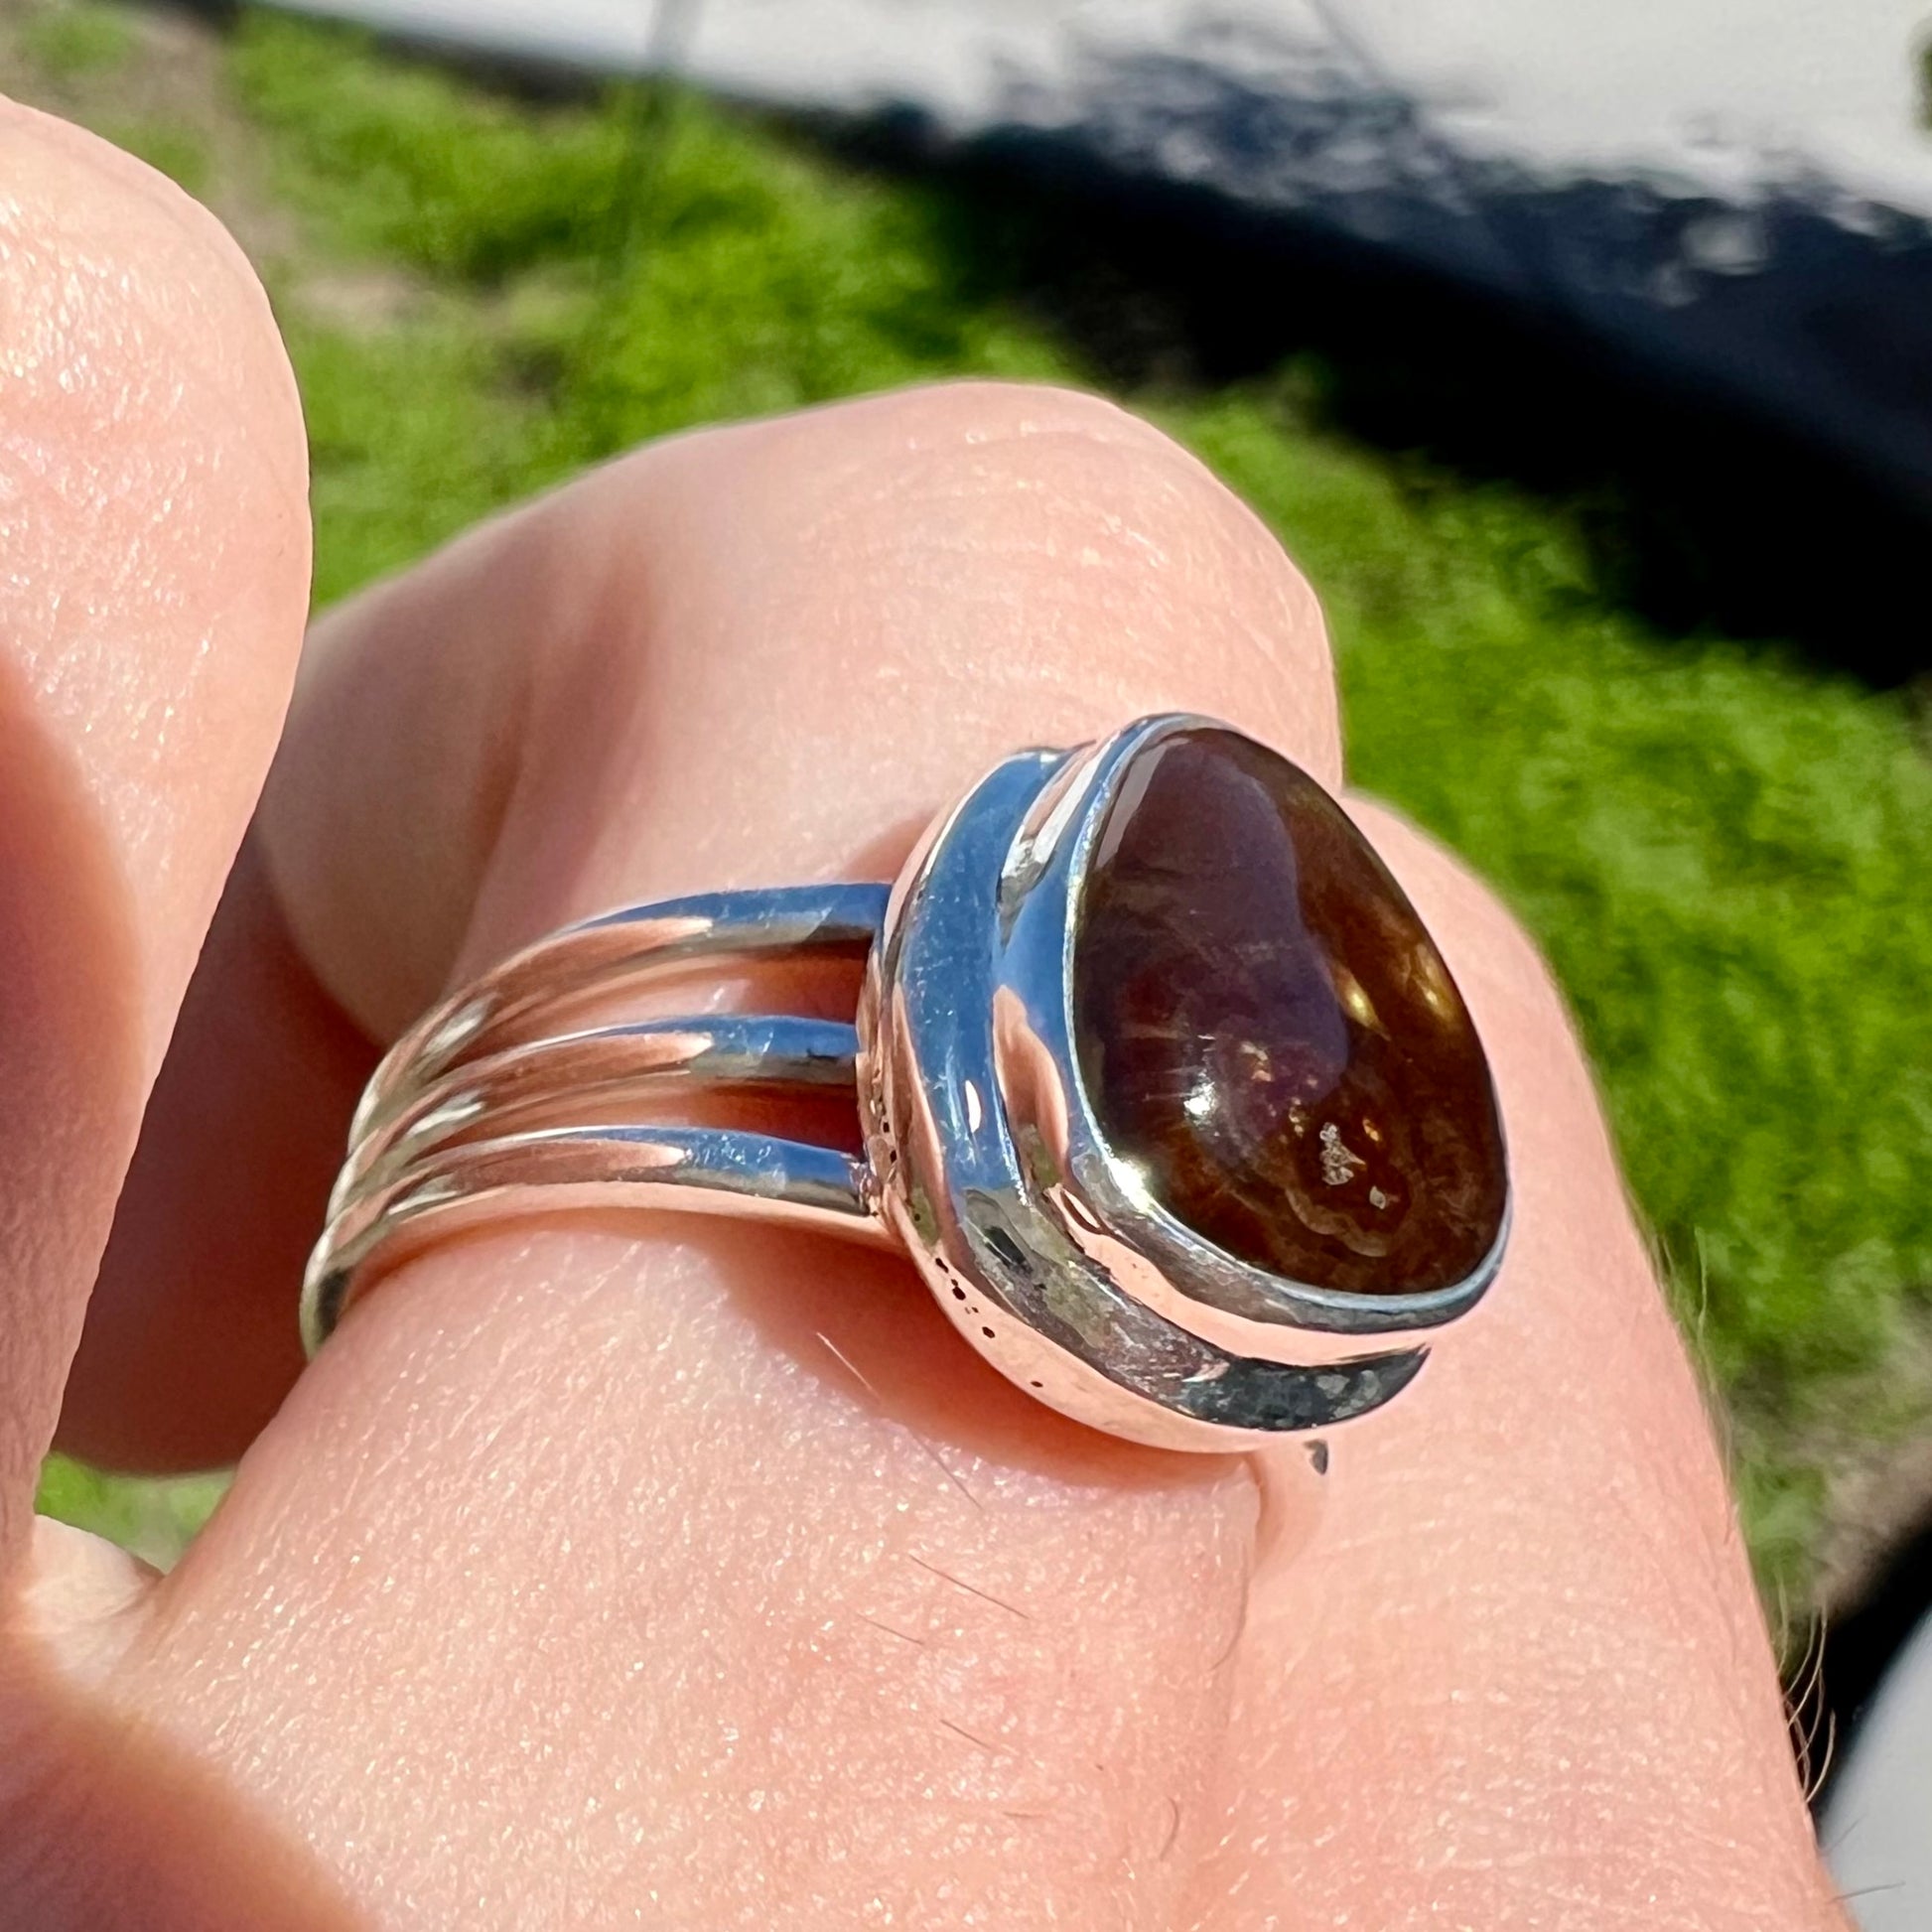 A ladies' freeform cabochon cut fire agate ring in sterling silver.